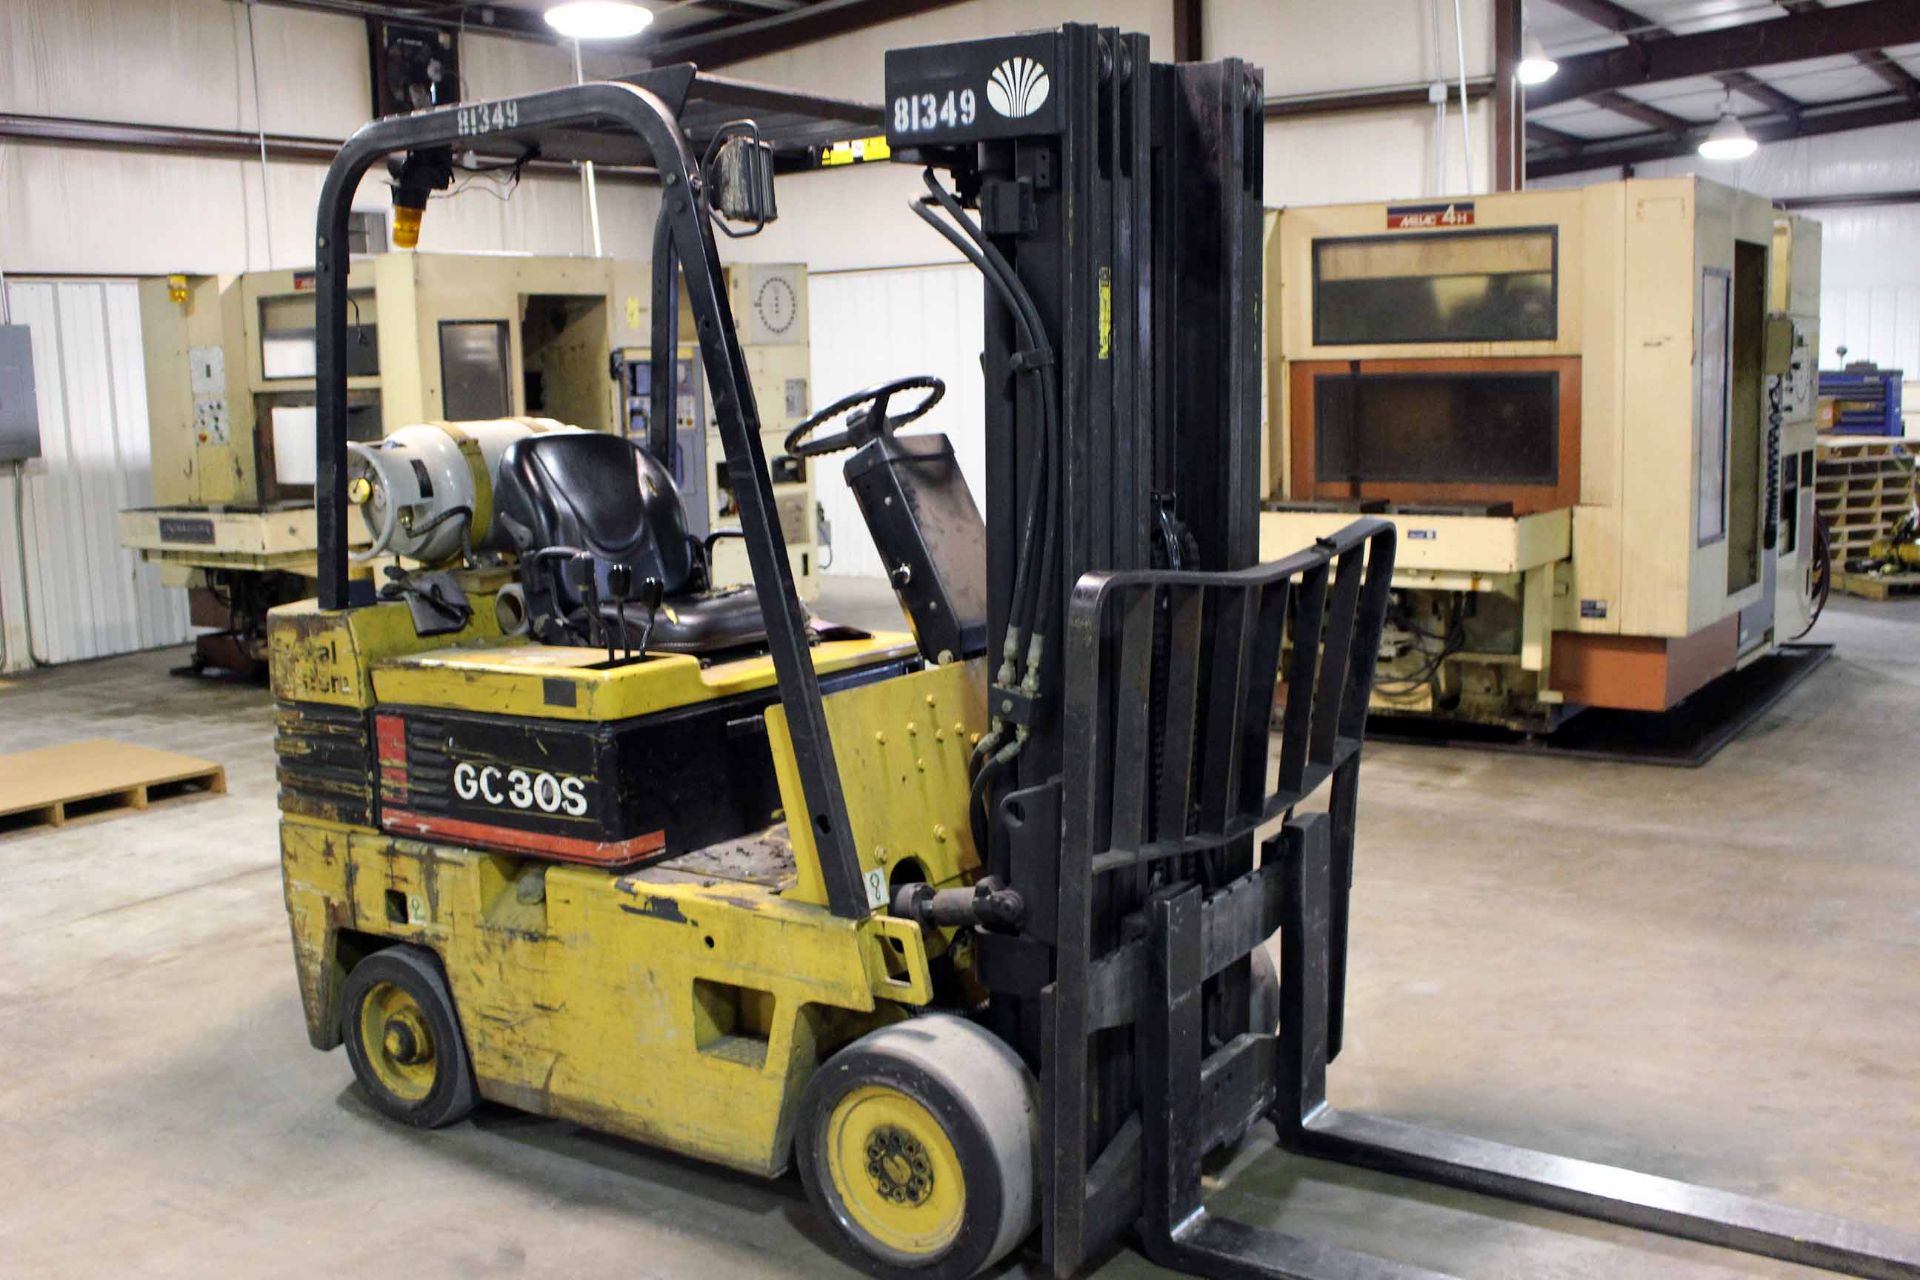 FORKLIFT, DAEWOO 6,000 LB. CAP. MDL. GC30S-2, LP gas pwrd., 3-stage mast, 173" lift ht., 4' forks, - Image 3 of 4